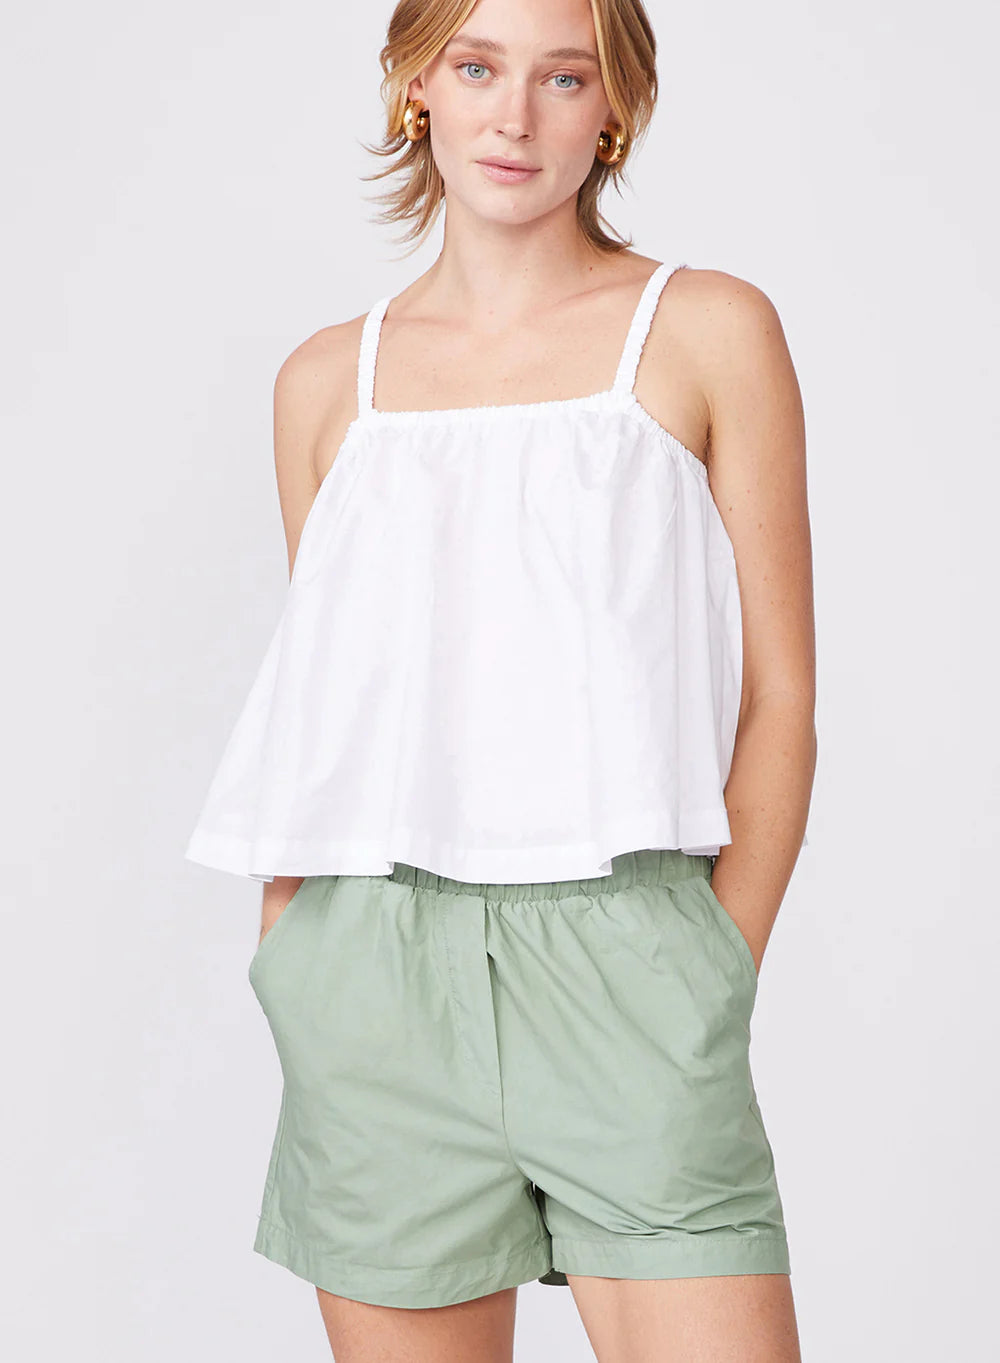 Stateside Structured Poplin Swing Top, Fun Top, Summer Top, White top, Strappy top, women's clothing